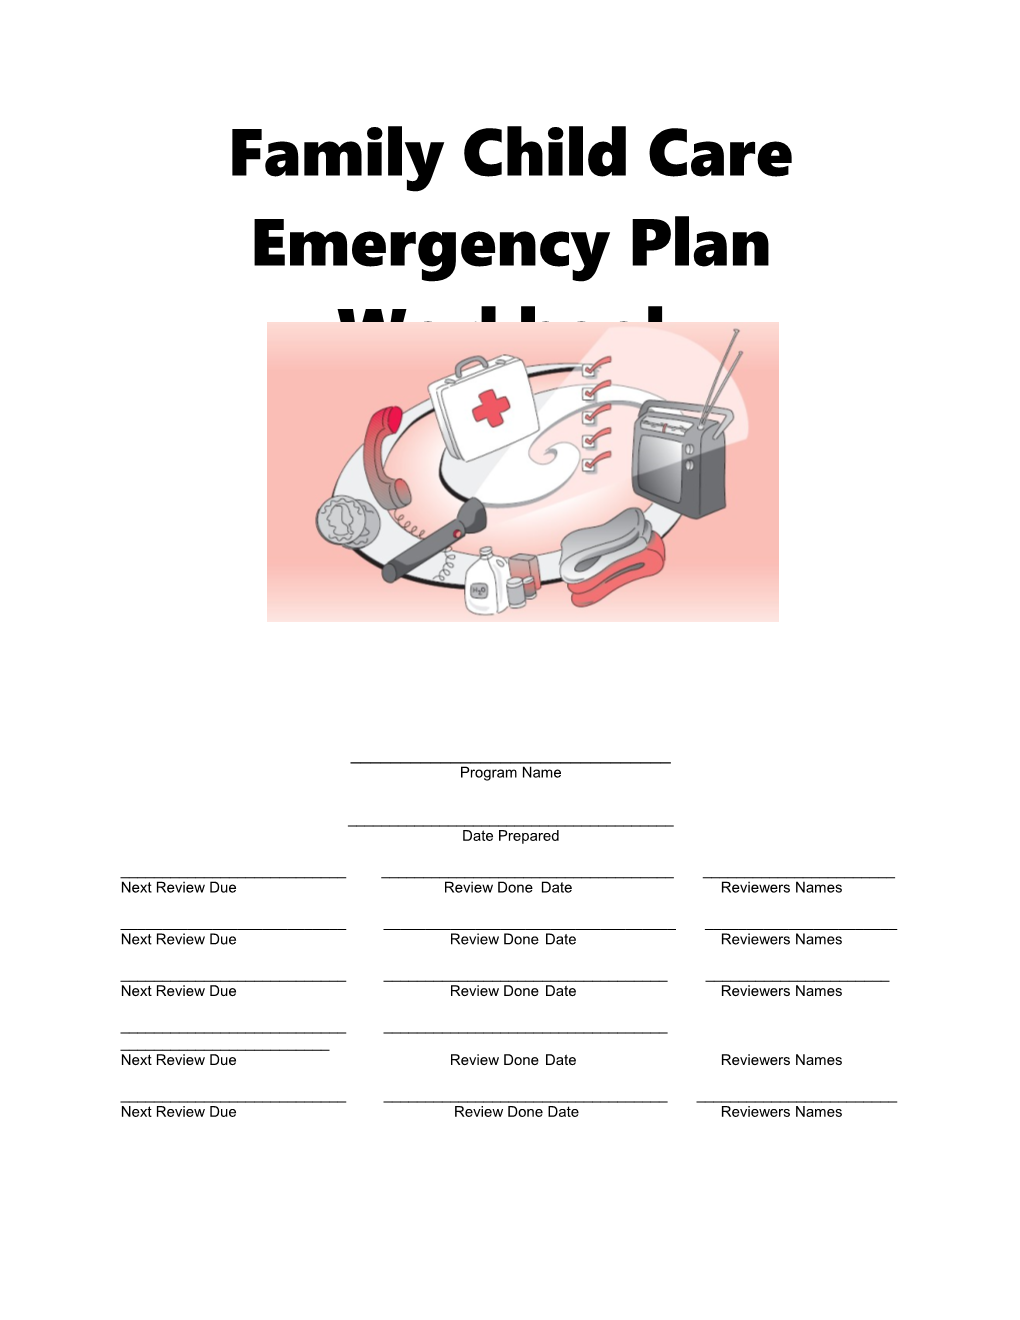 Family Child Care Emergency Plan